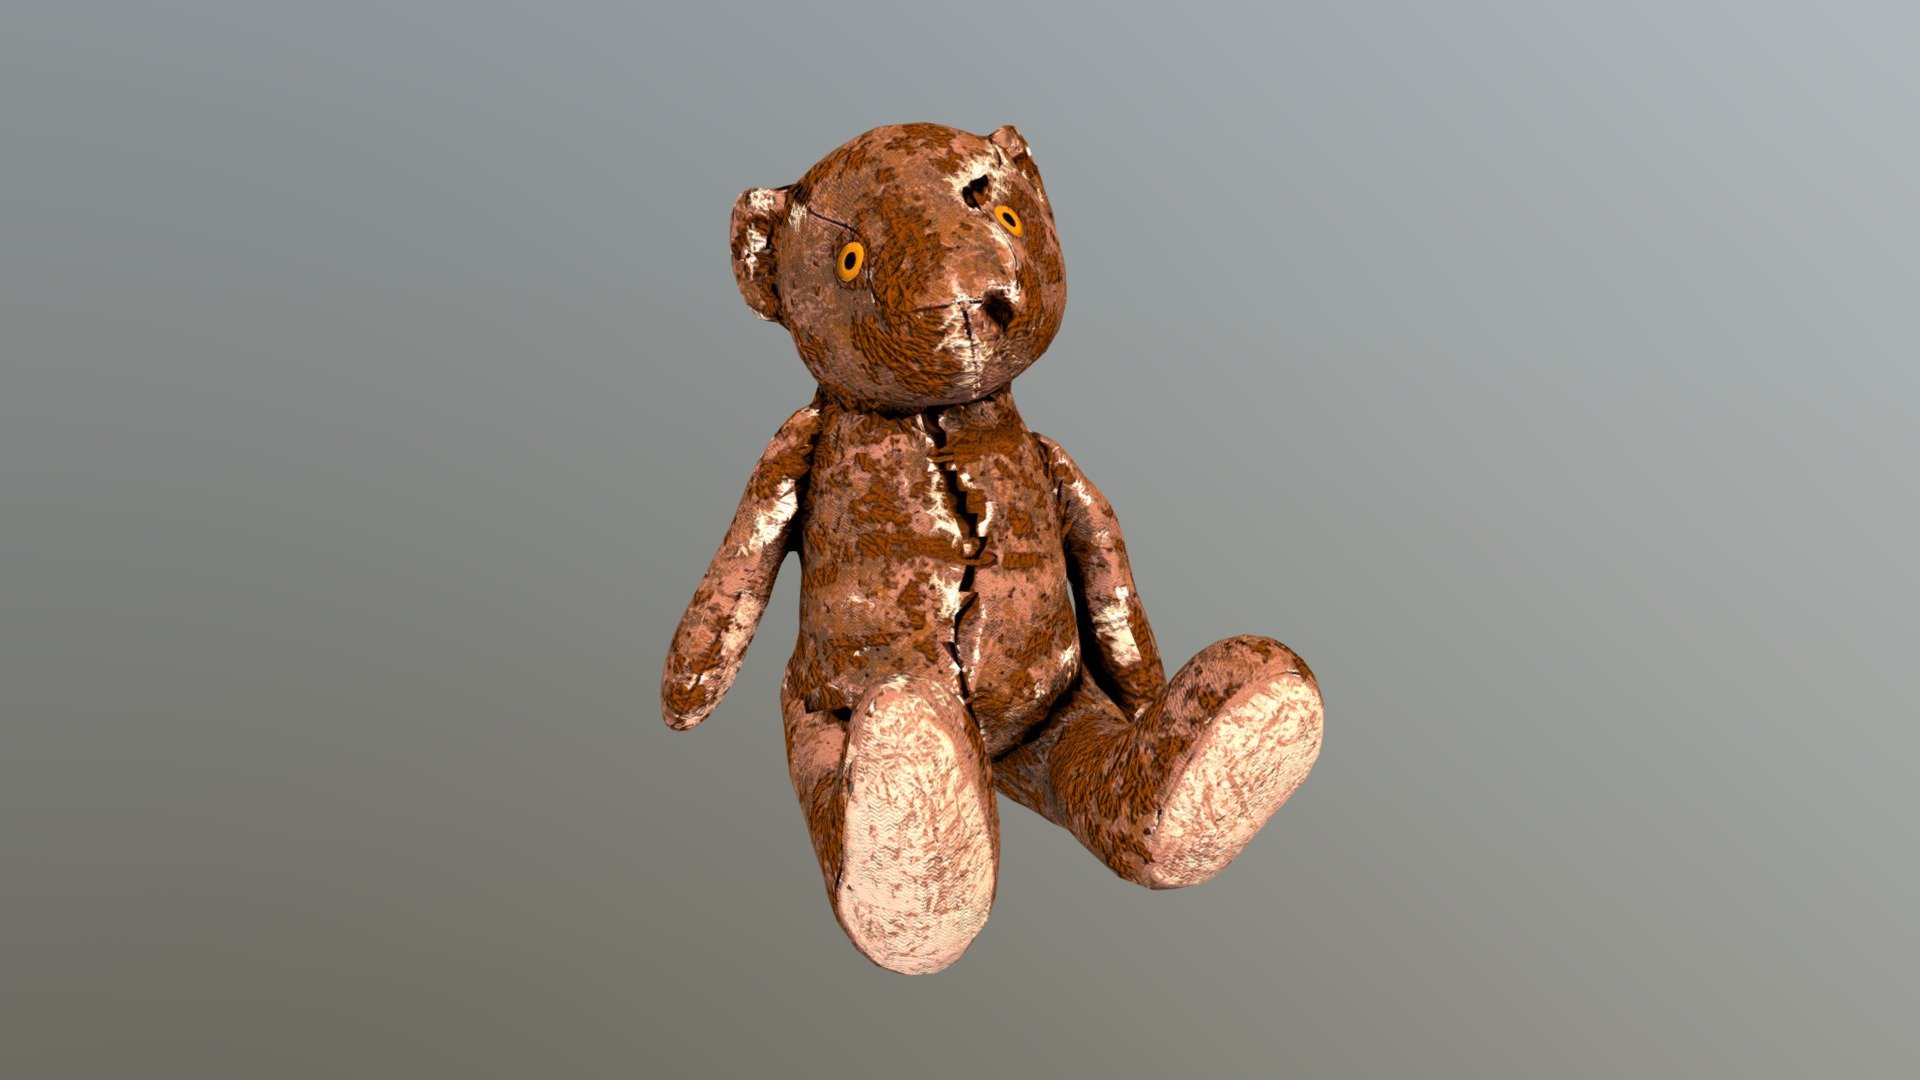 Here is the game ready 3D model of Old bear. 
All materials and textures are included with model.
Included textures are: Diffuse, Normal, Specular, Glossiness maps.
Model is low poly so ideal for games.

Polygons 3,108
Vertices 2,726 - Old Bear Toy - Buy Royalty Free 3D model by ulenspy 3d model